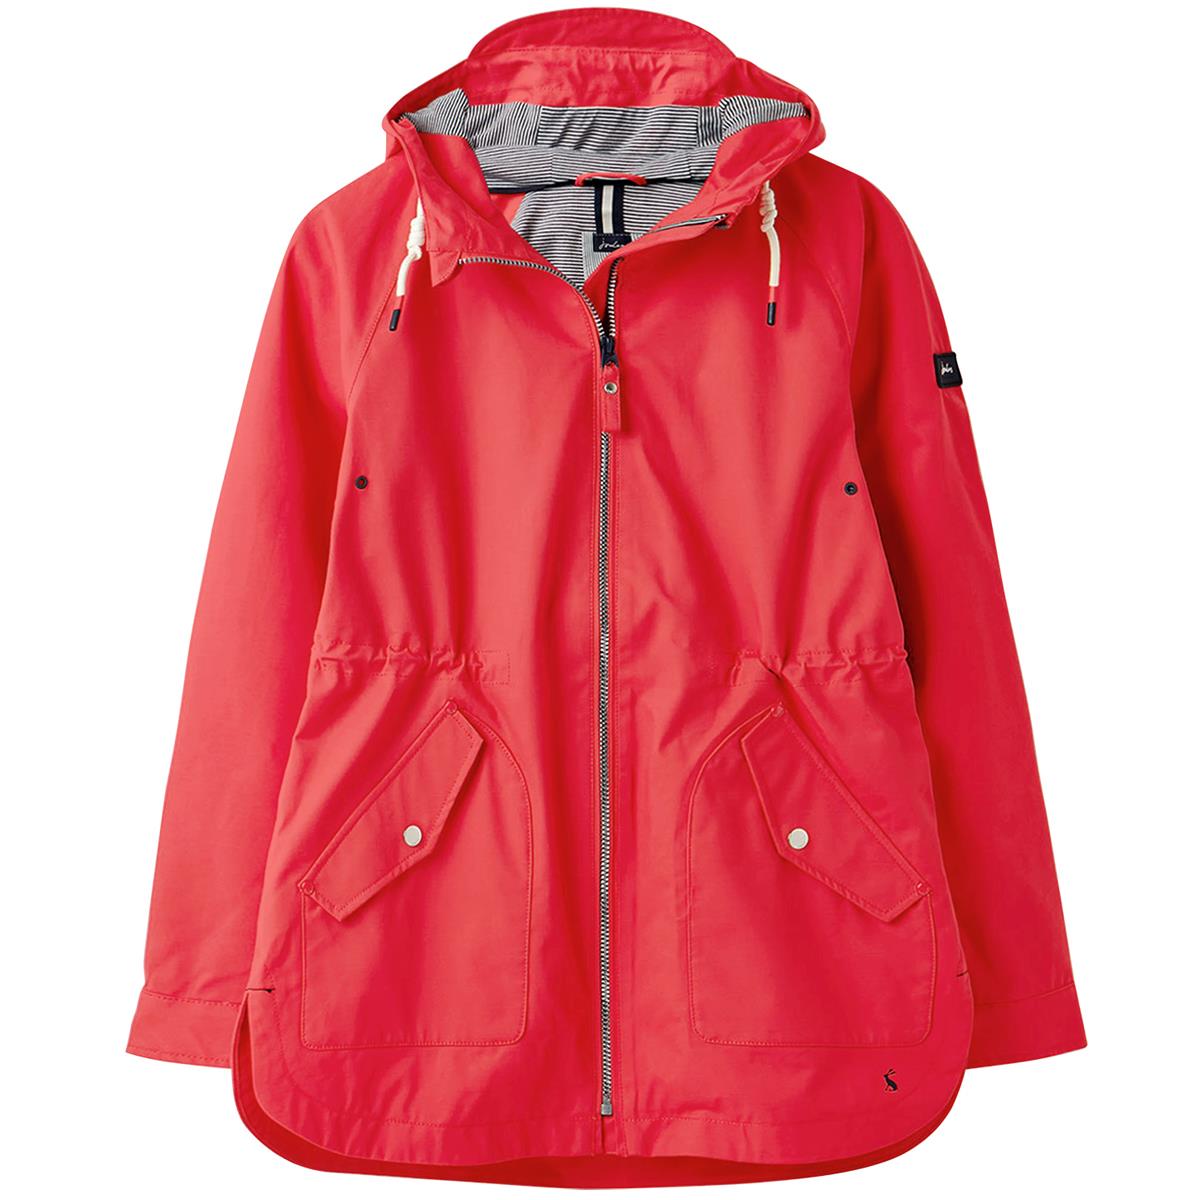 What colors & sizes does the Joules Shoreside Coastal Waterproof Jacket come in?